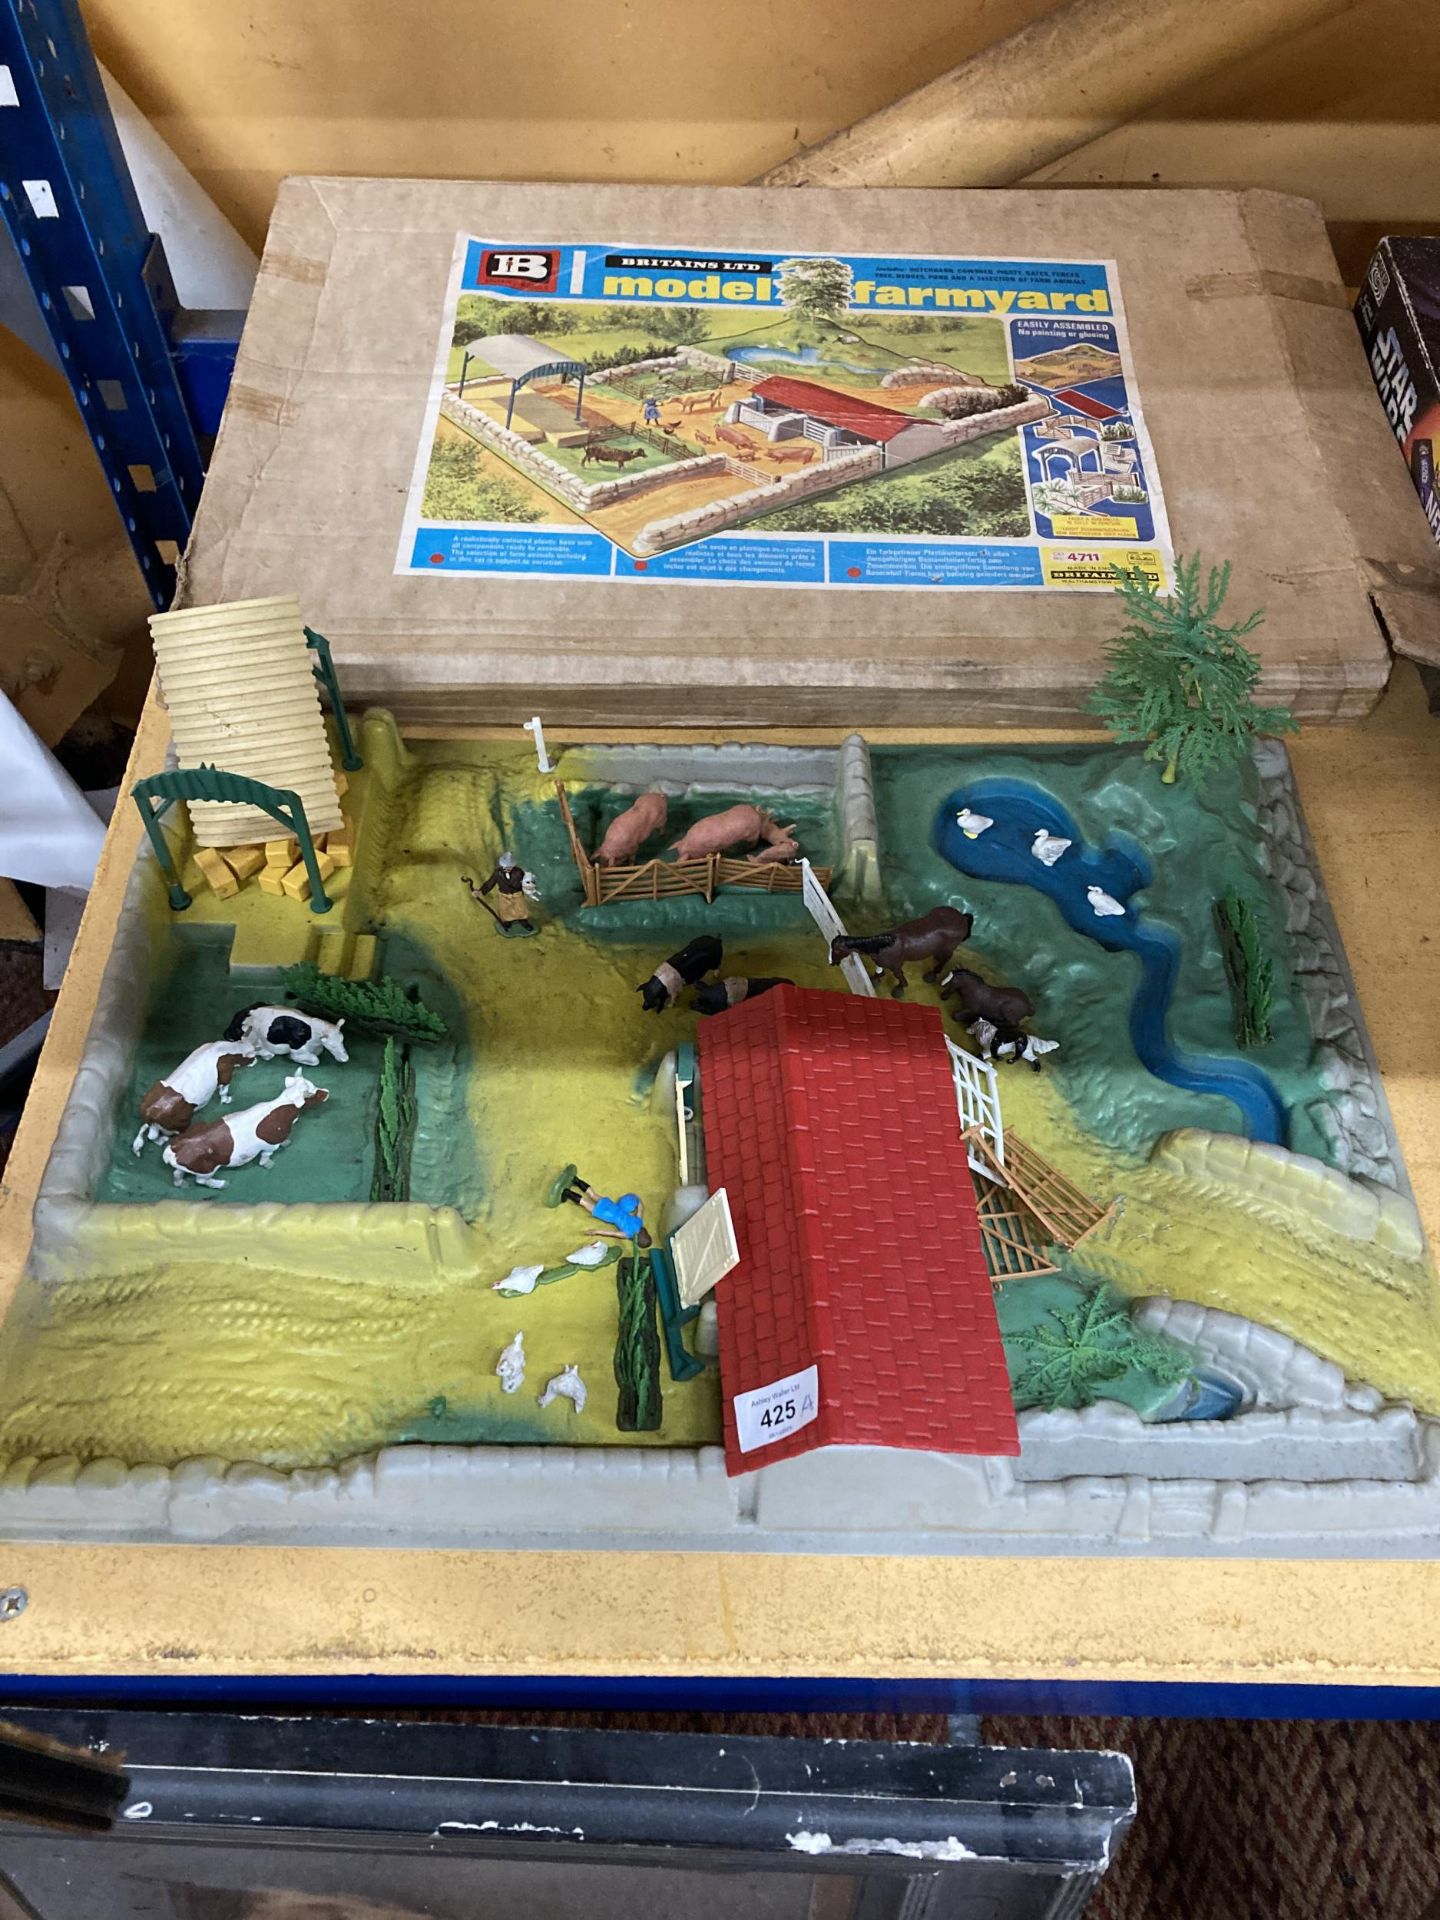 A COMPLETE ORIGINAL BRITIANS MODEL FARM YARD NO 4711 FROM THE LATE 1970'S WITH ORIGINAL BOX